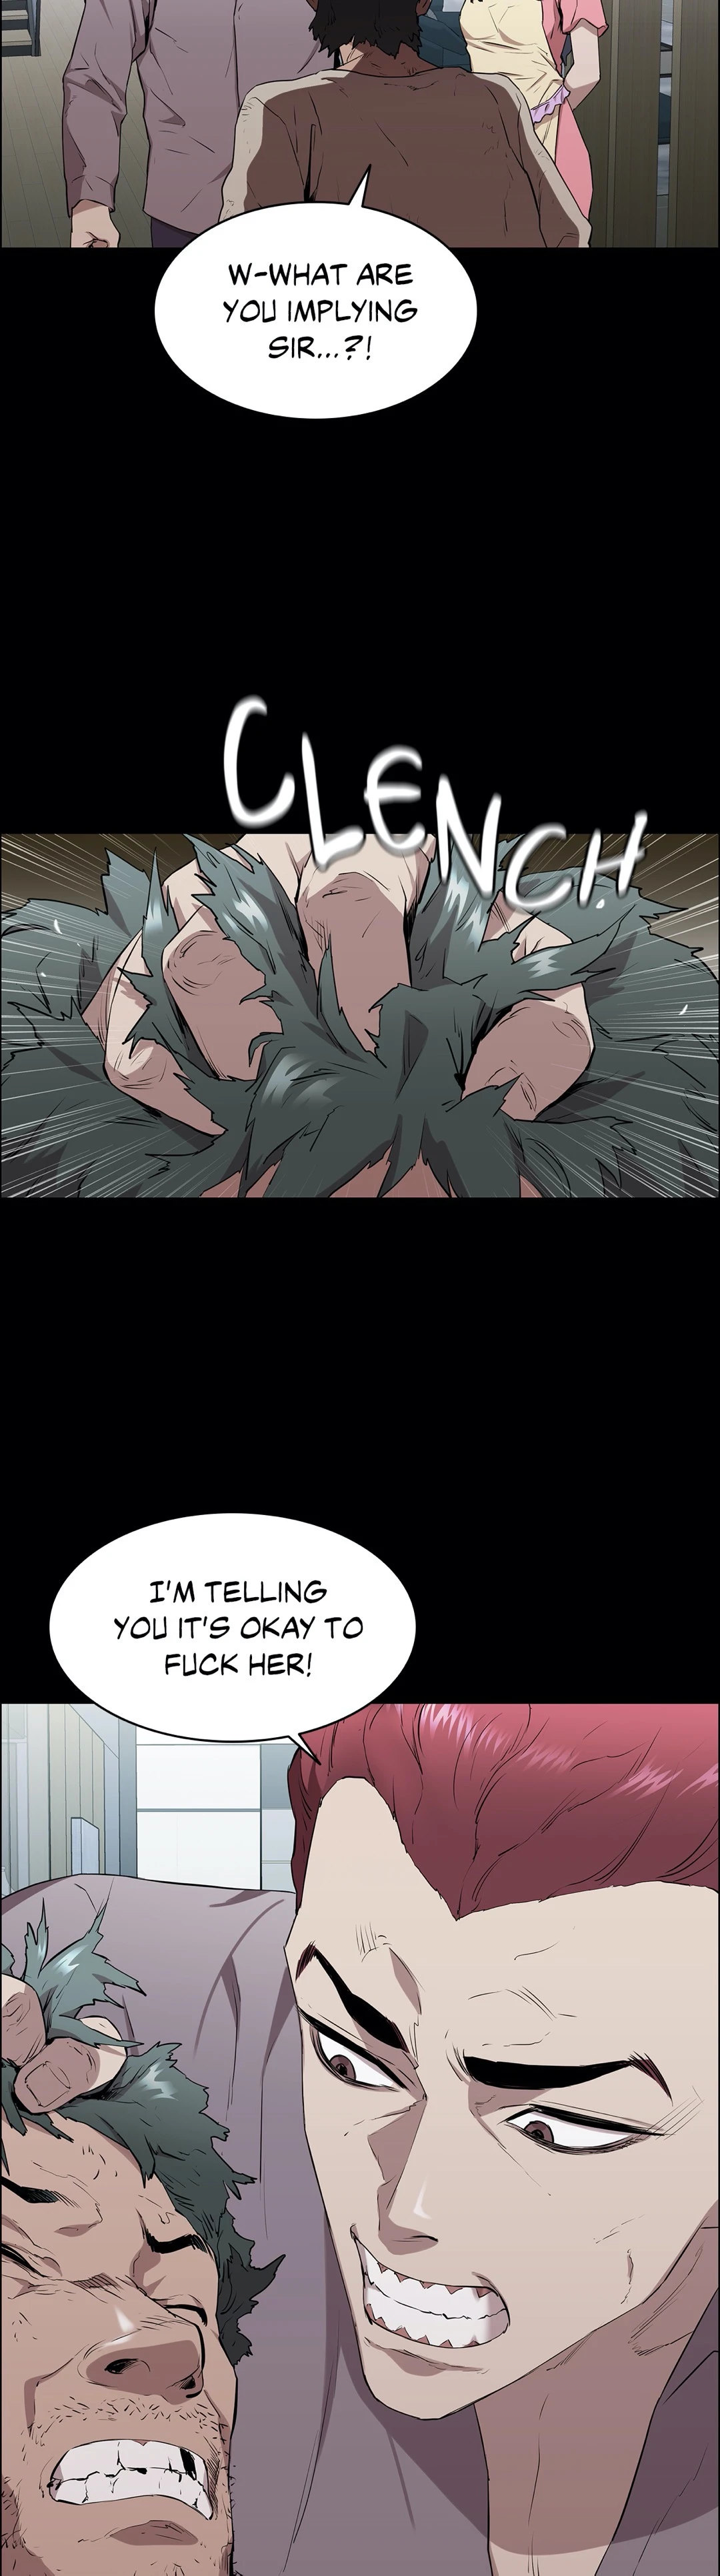 Thorns on Innocence - Chapter 1 Page 23